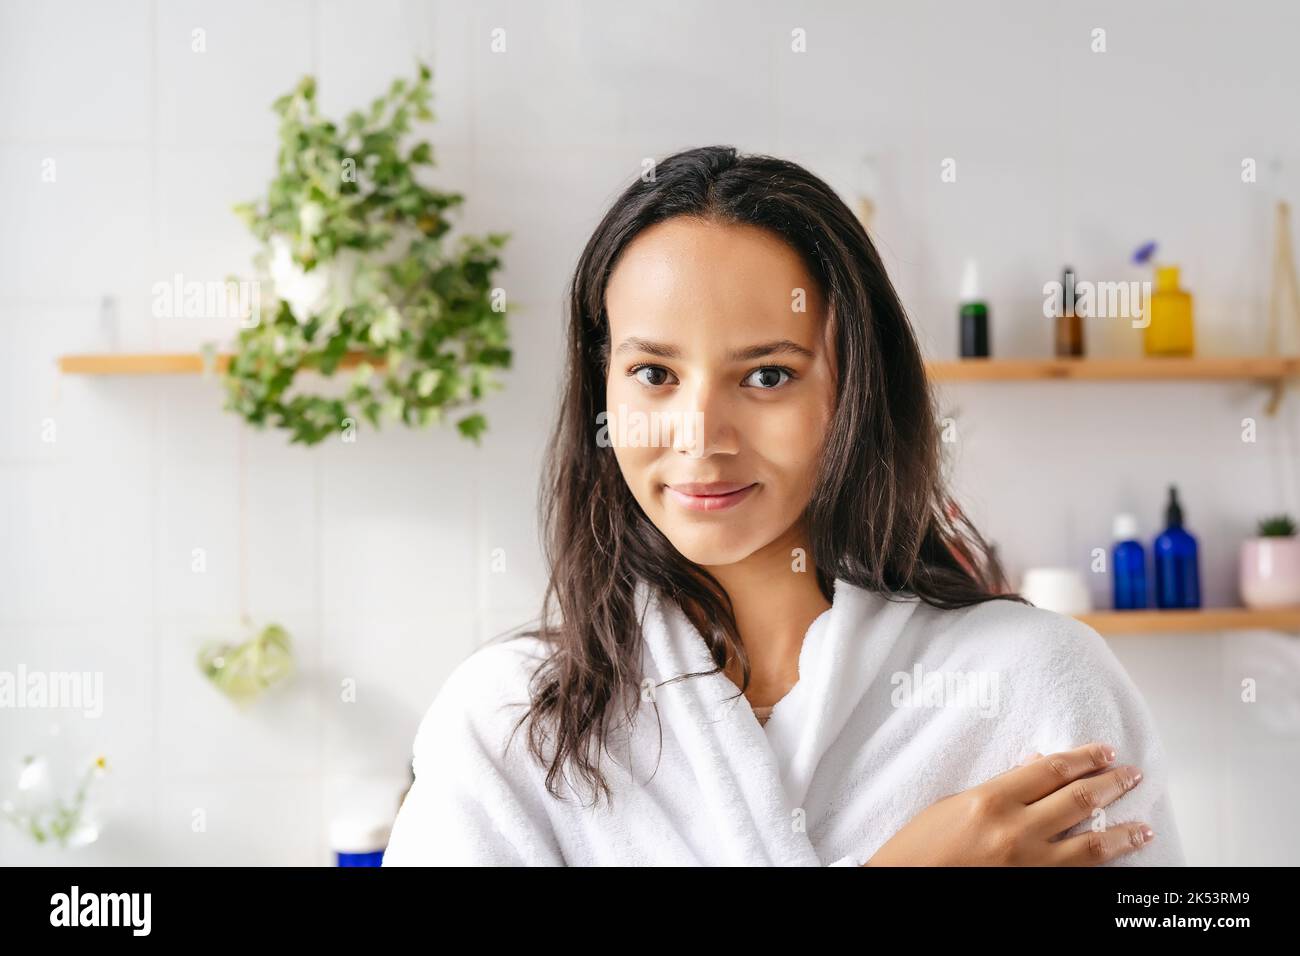 Portrait of young beautiful woman with dark skin in white bathrobe with cosmetic bottle on the background. Confident young woman feeling harmonous and calm in her body. Wellness and body positivity Stock Photo